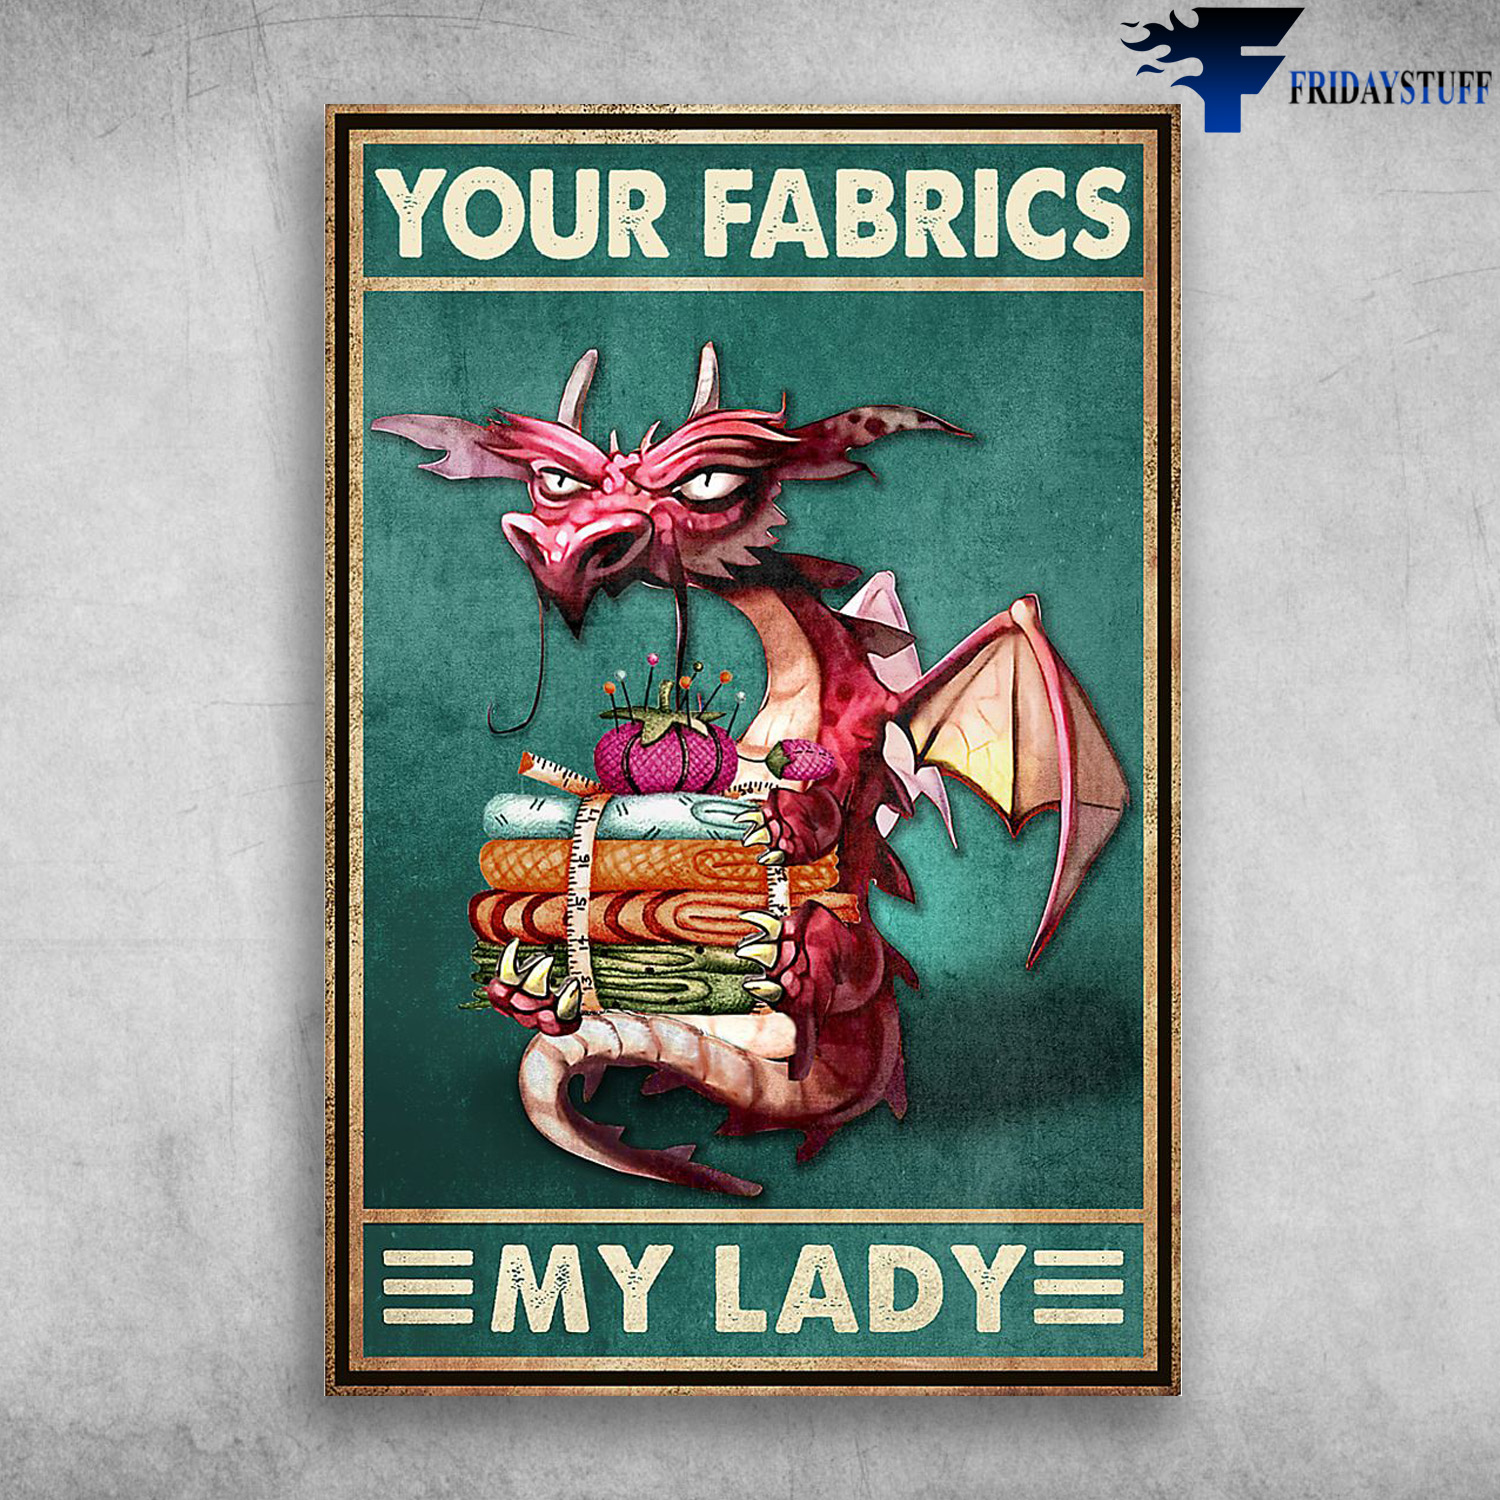 Sewing Gragon - Your Fabrics, My Lady